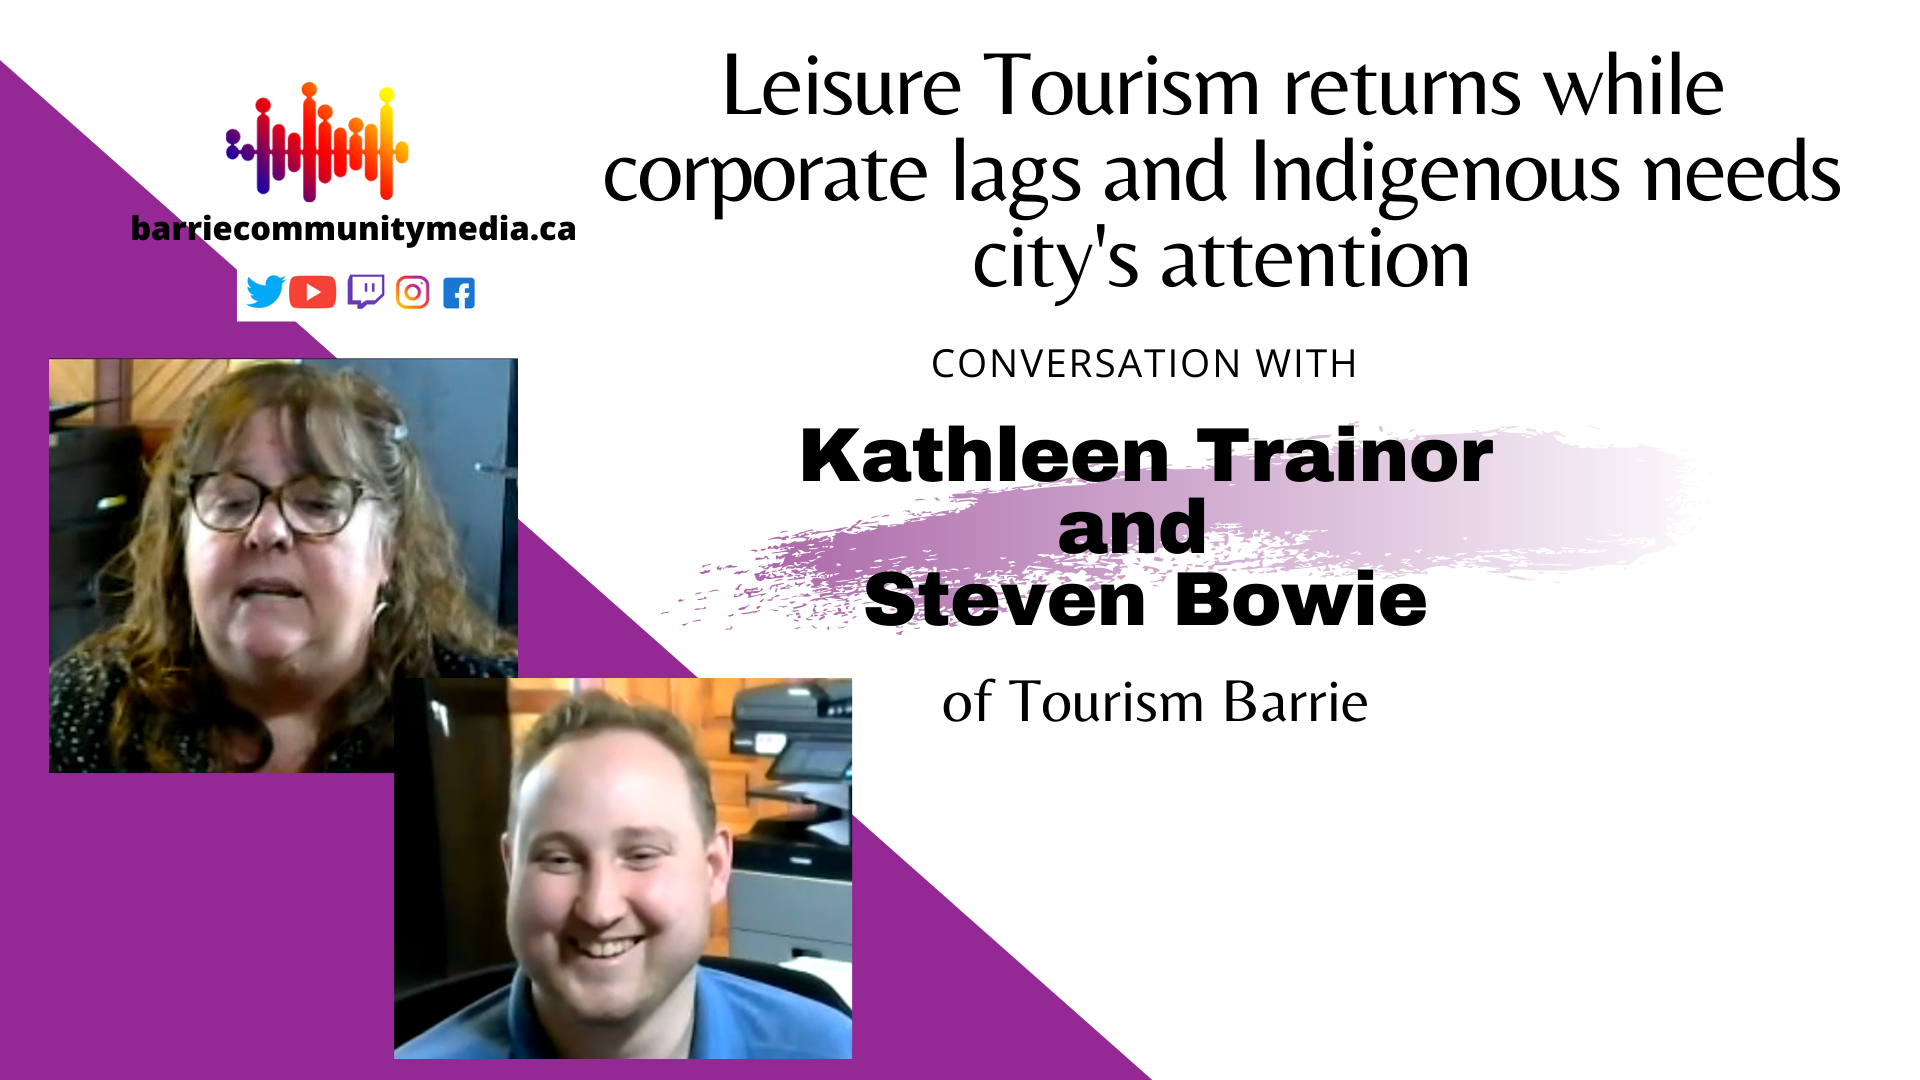 Sports Tourism returns while corporate tourism lags and Indigenous tourism needs city’s attention